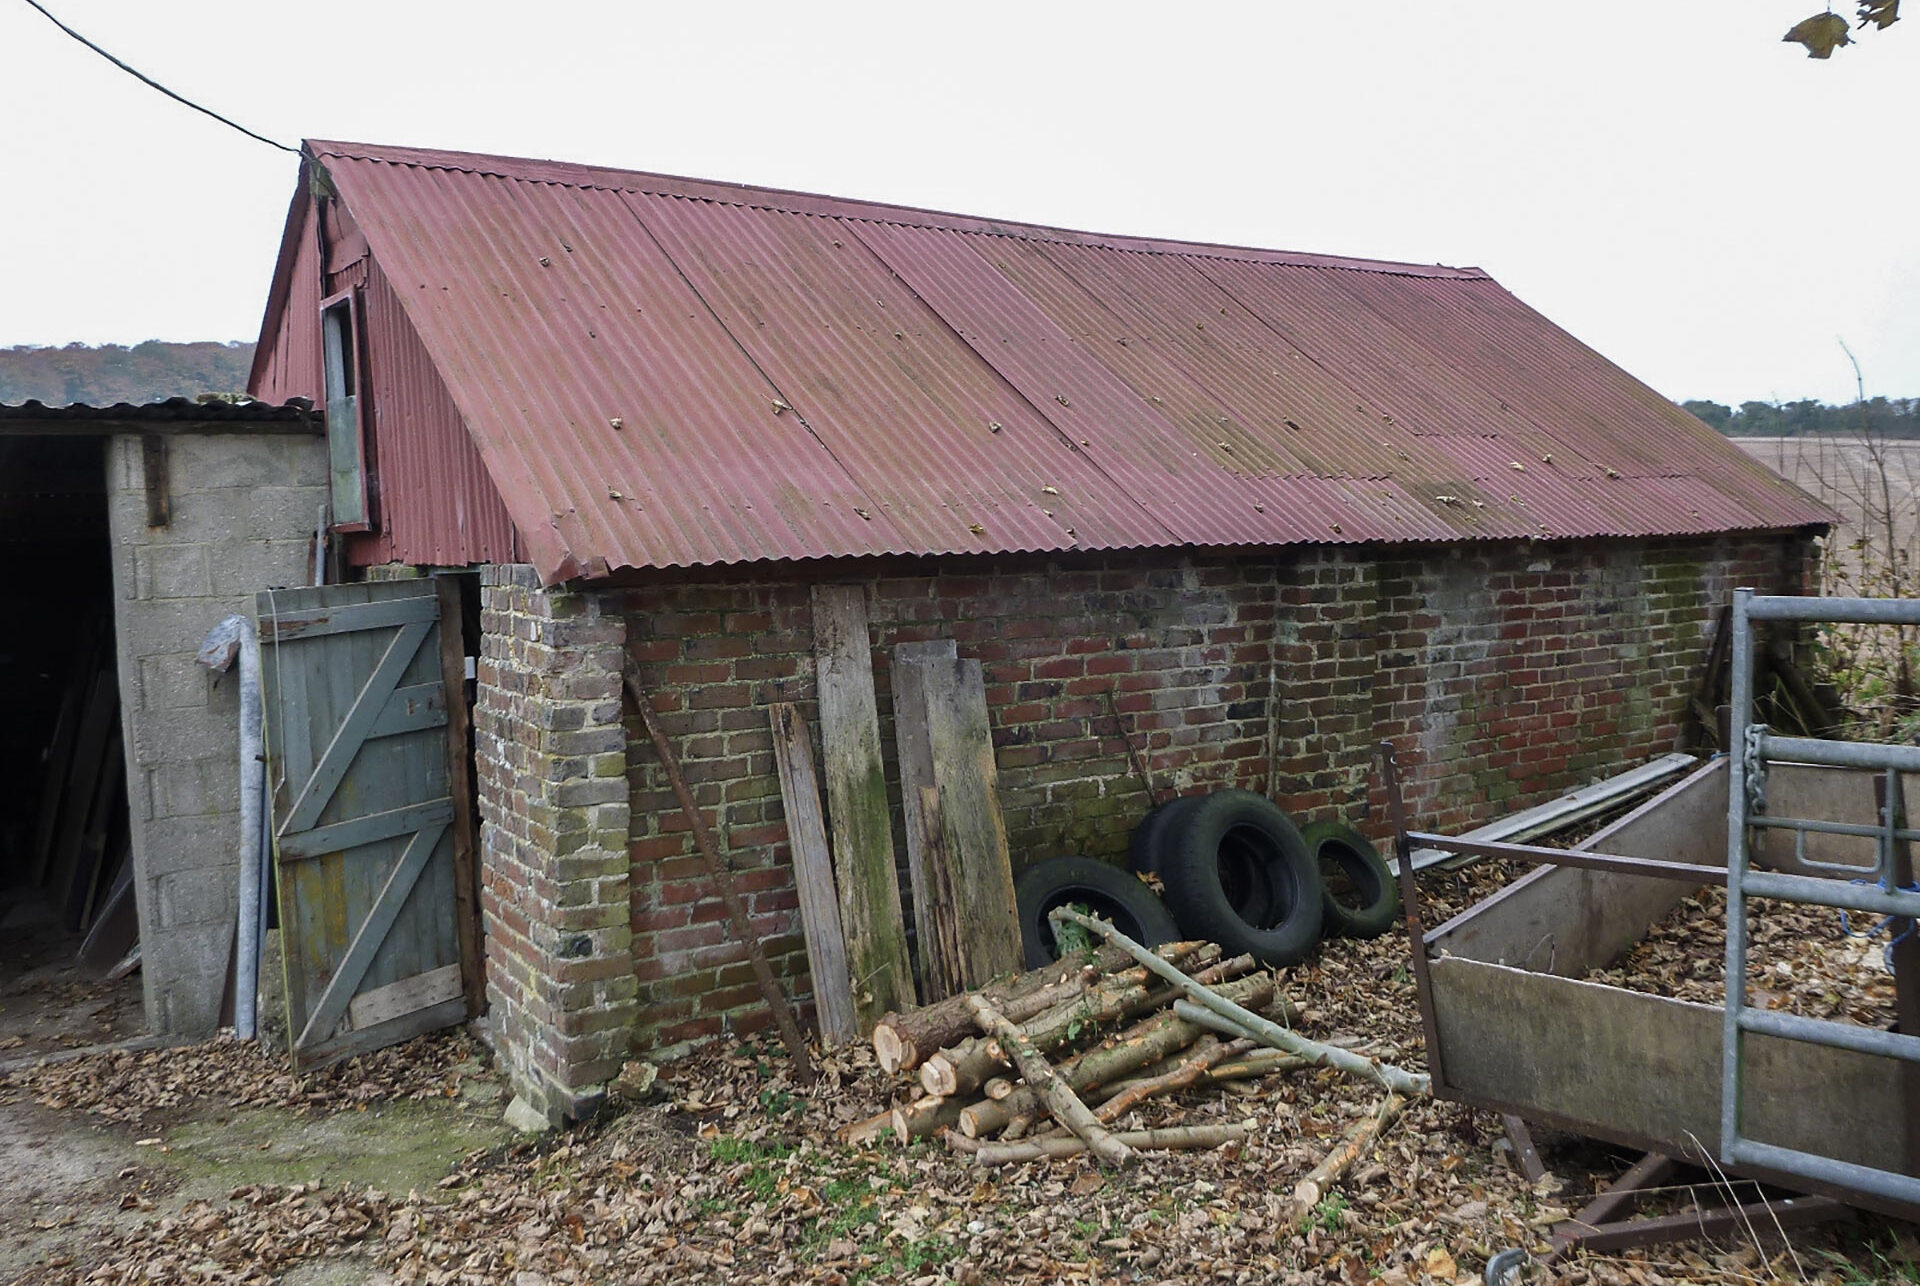 rear of the barn before conversion